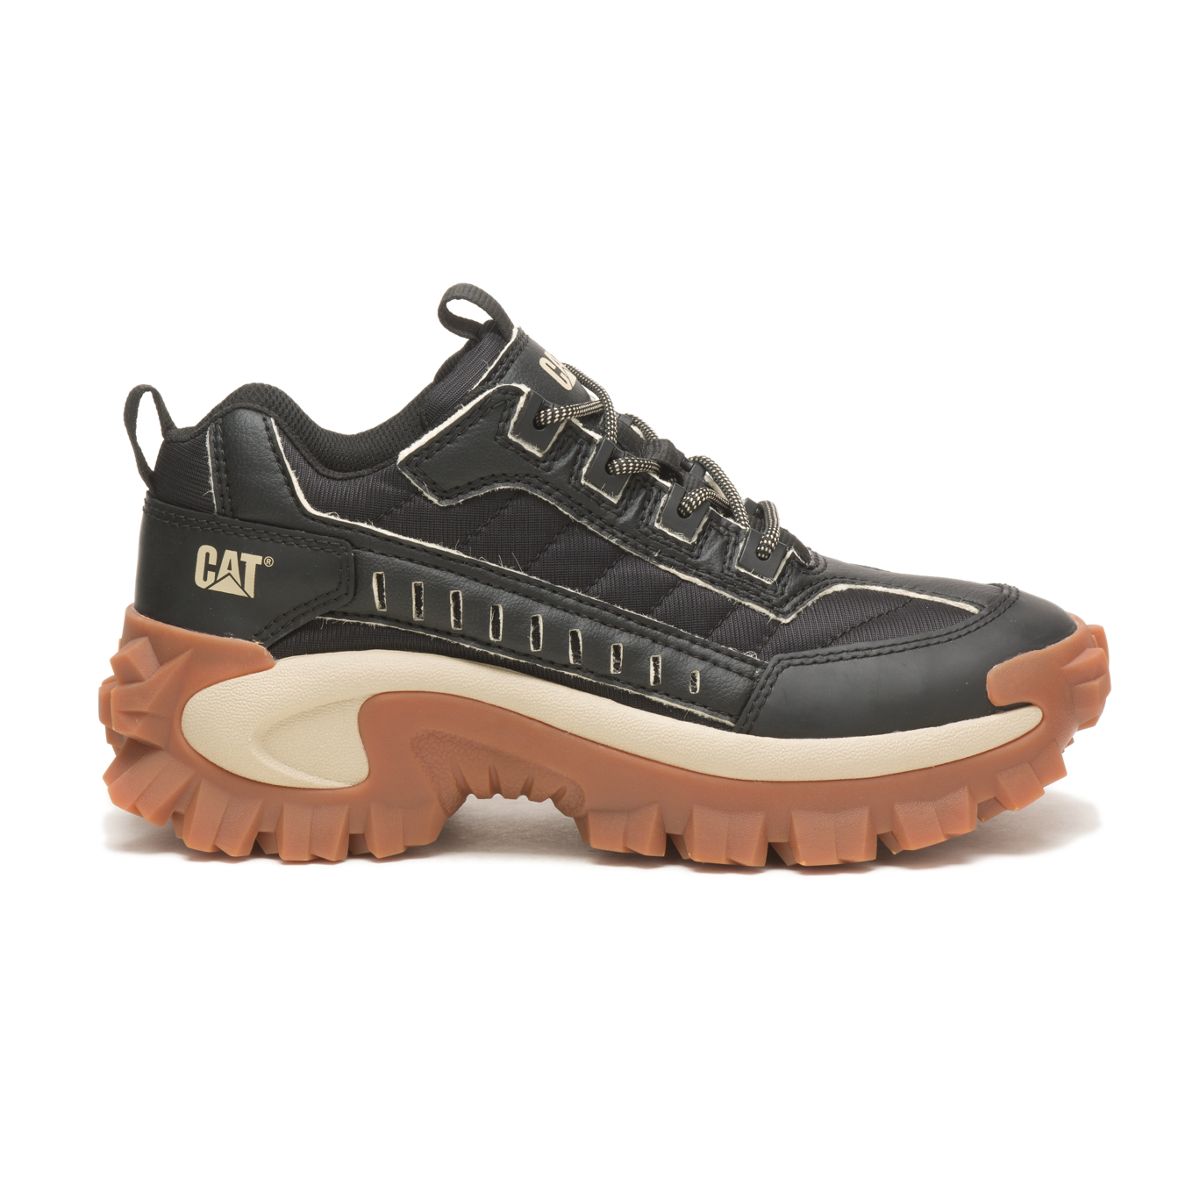 TENIS CATERPILLAR HOMBRE CASUAL URBANO INTRUDER SUPRCHARGED 1101649